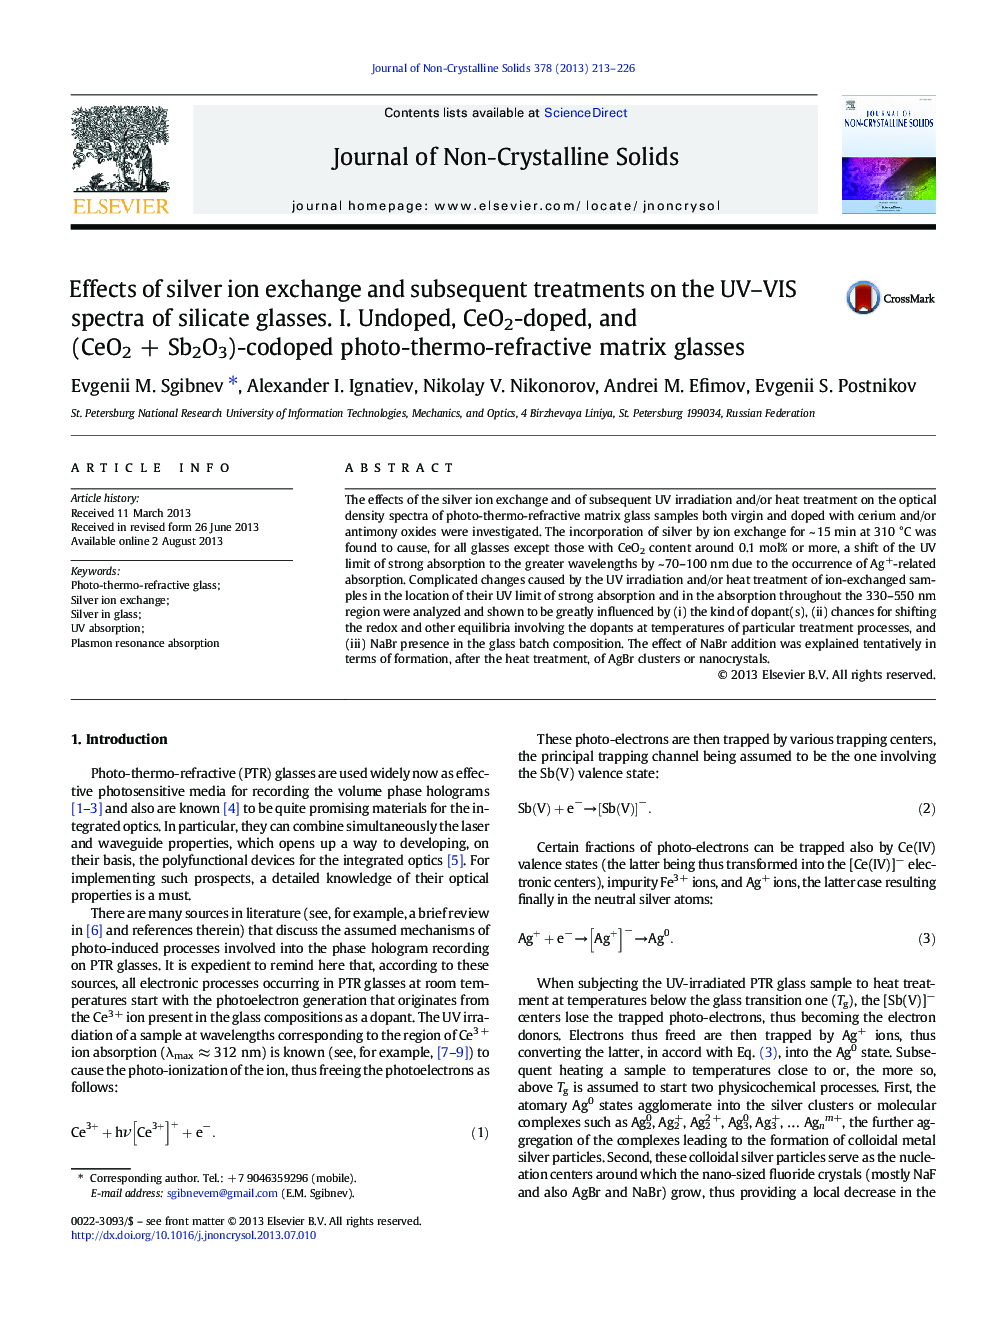 Effects of silver ion exchange and subsequent treatments on the UV-VIS spectra of silicate glasses. I. Undoped, CeO2-doped, and (CeO2Â +Â Sb2O3)-codoped photo-thermo-refractive matrix glasses